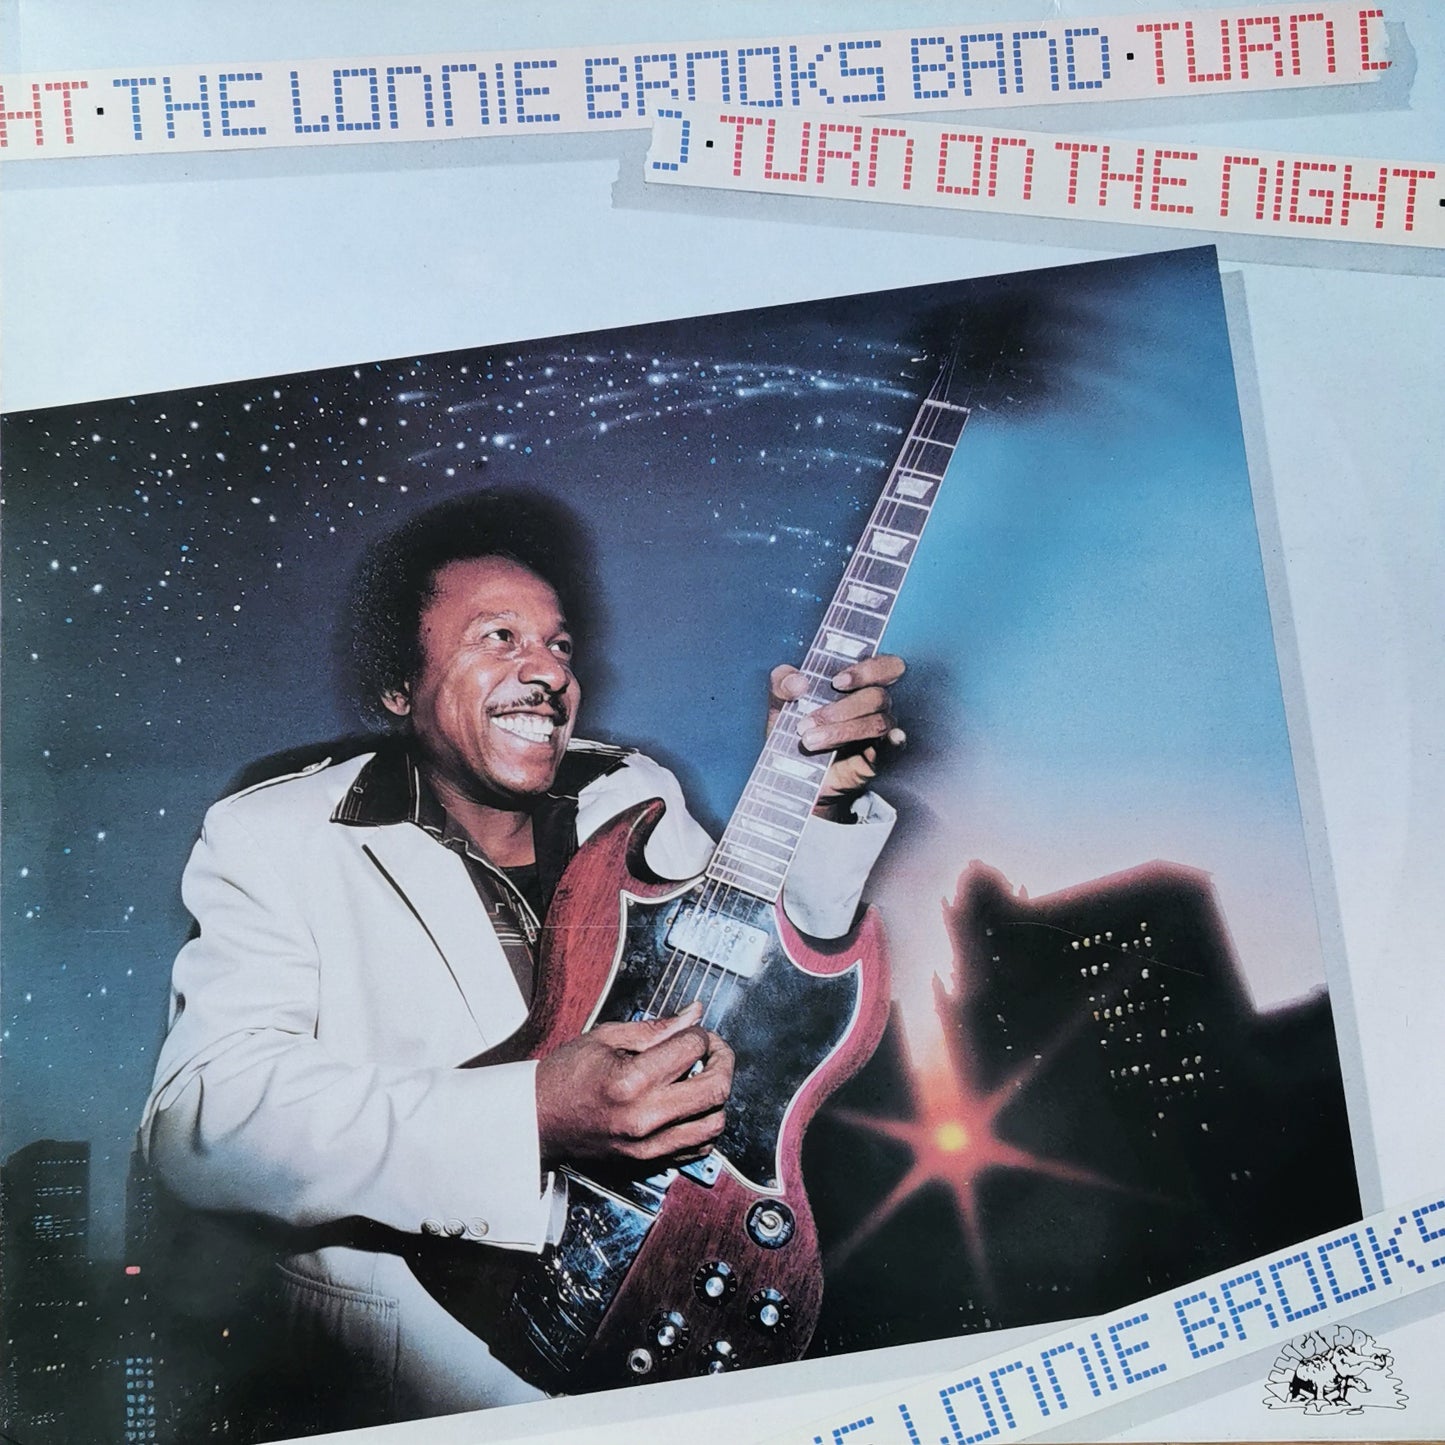 THE LONNIE BROOKS BAND - Turn On The Night